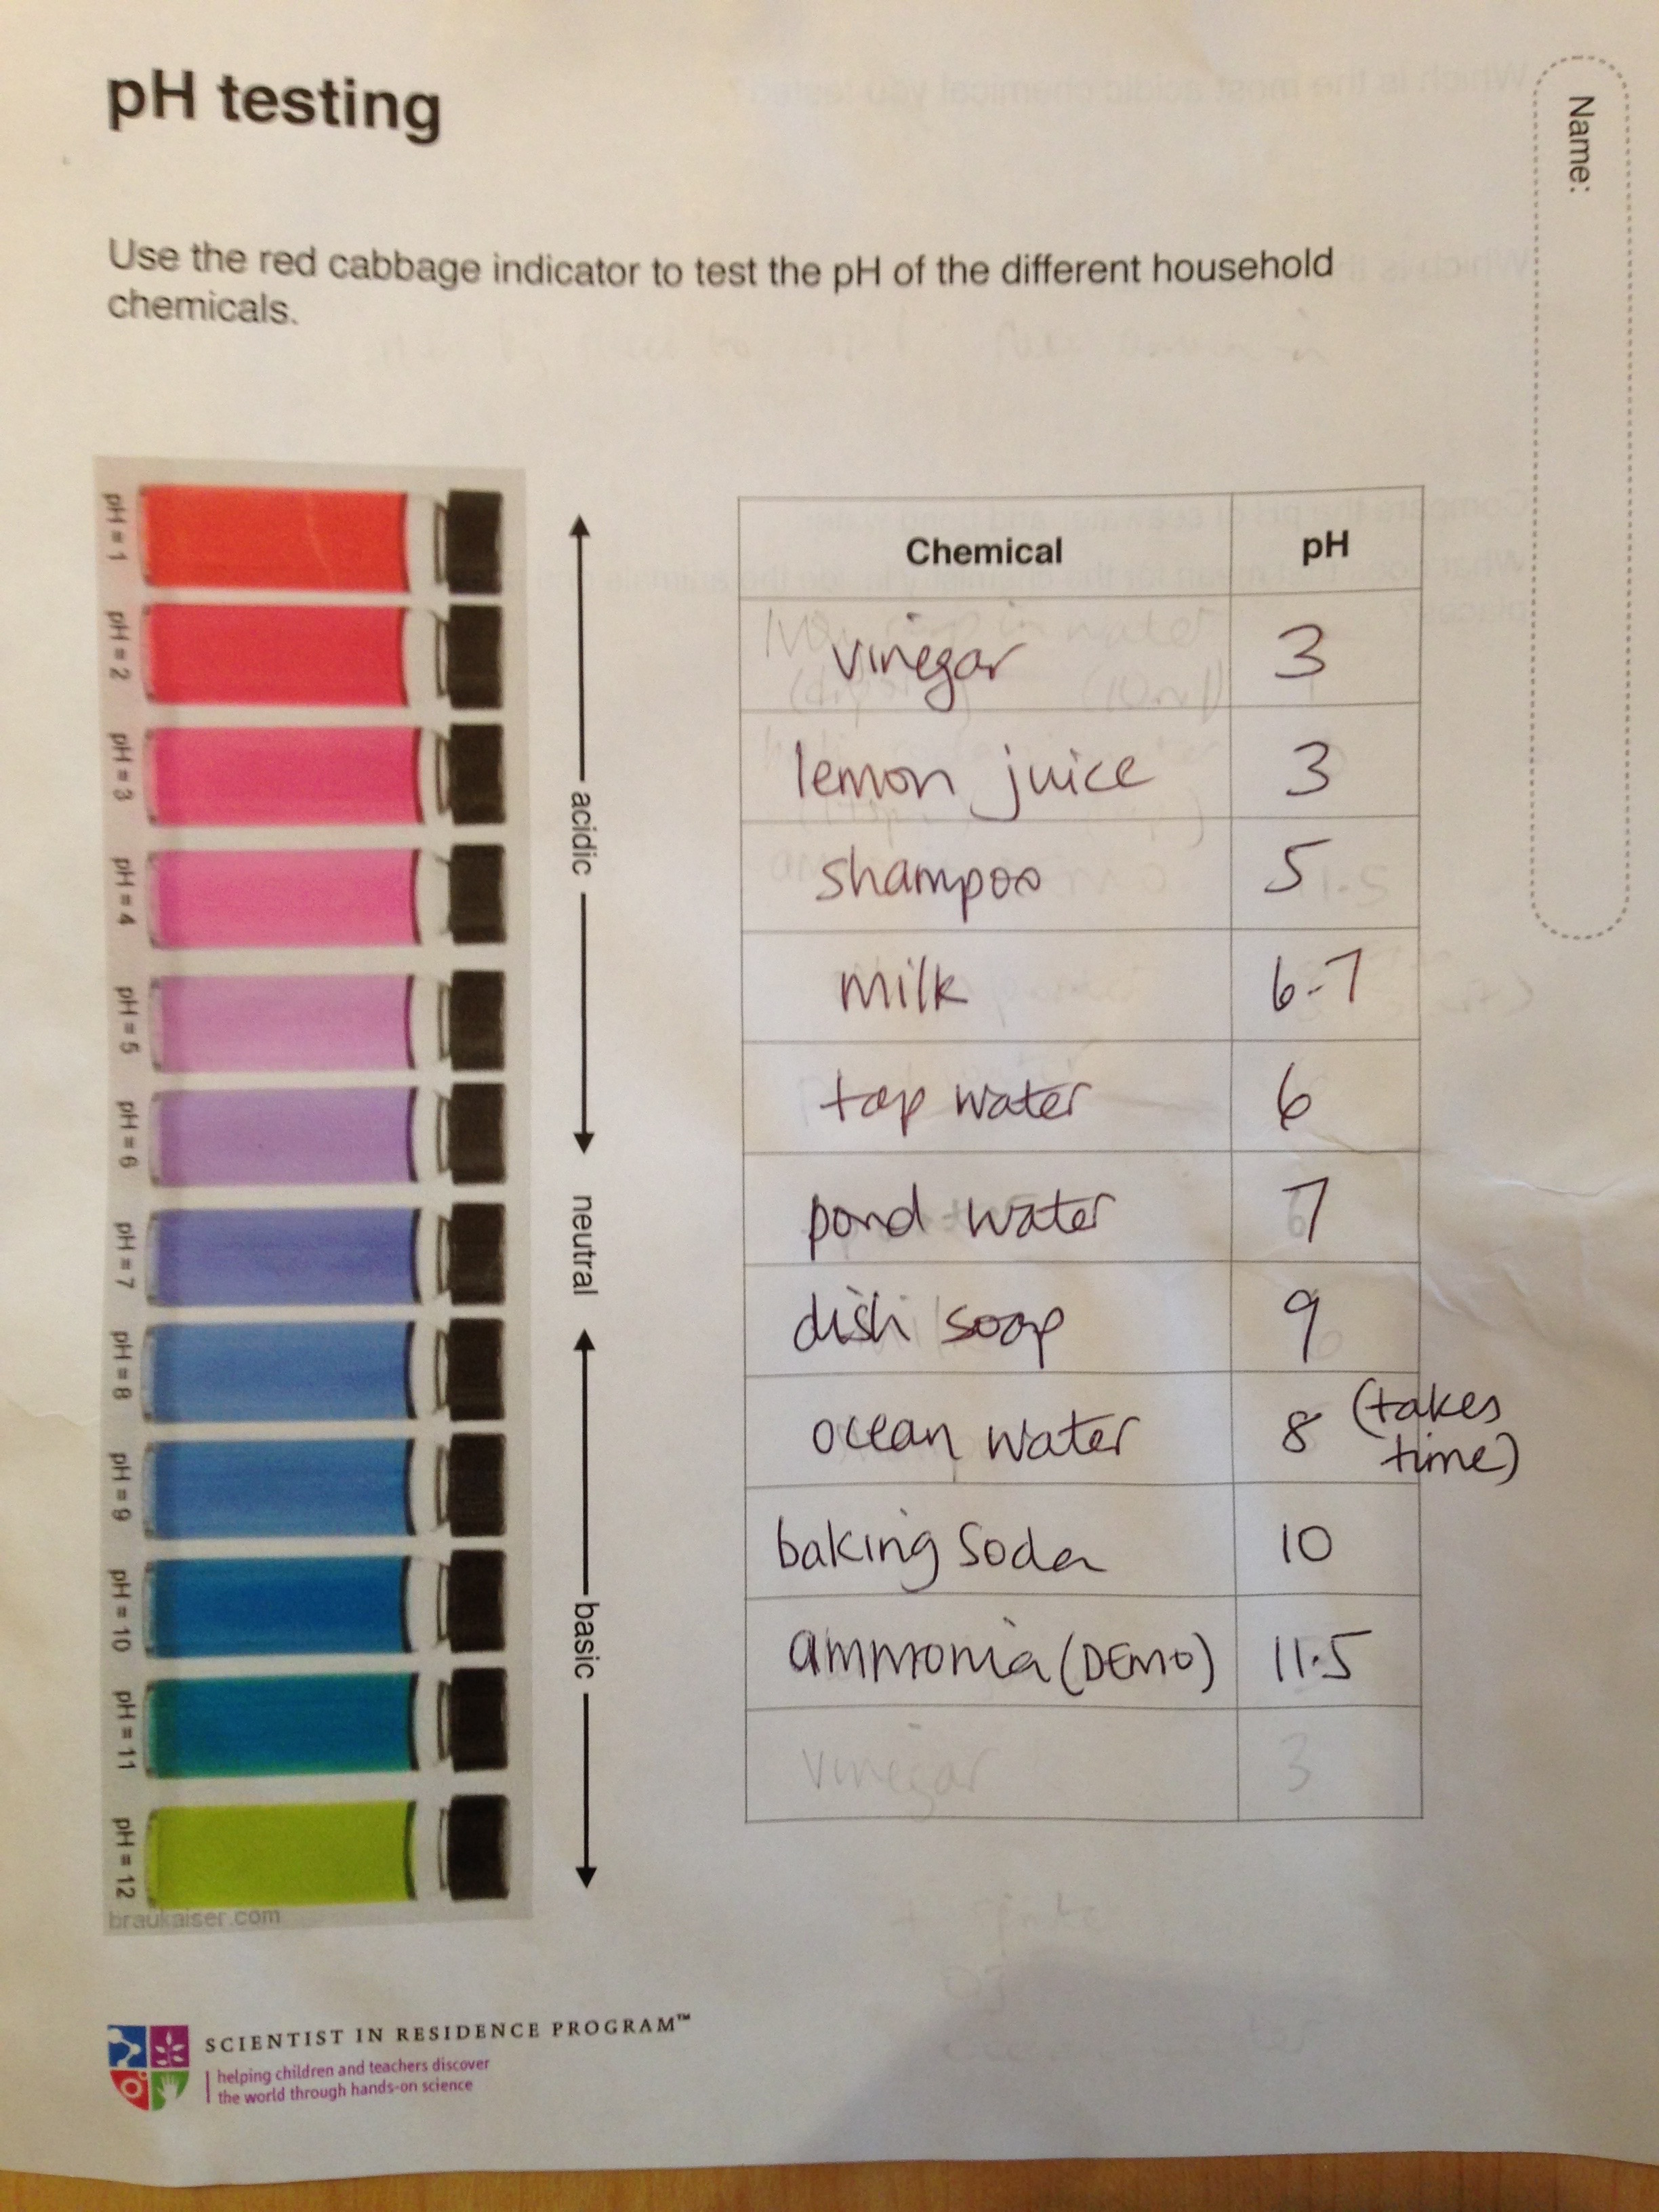 Red cabbage dye (and pH indicator) ingridscience.ca